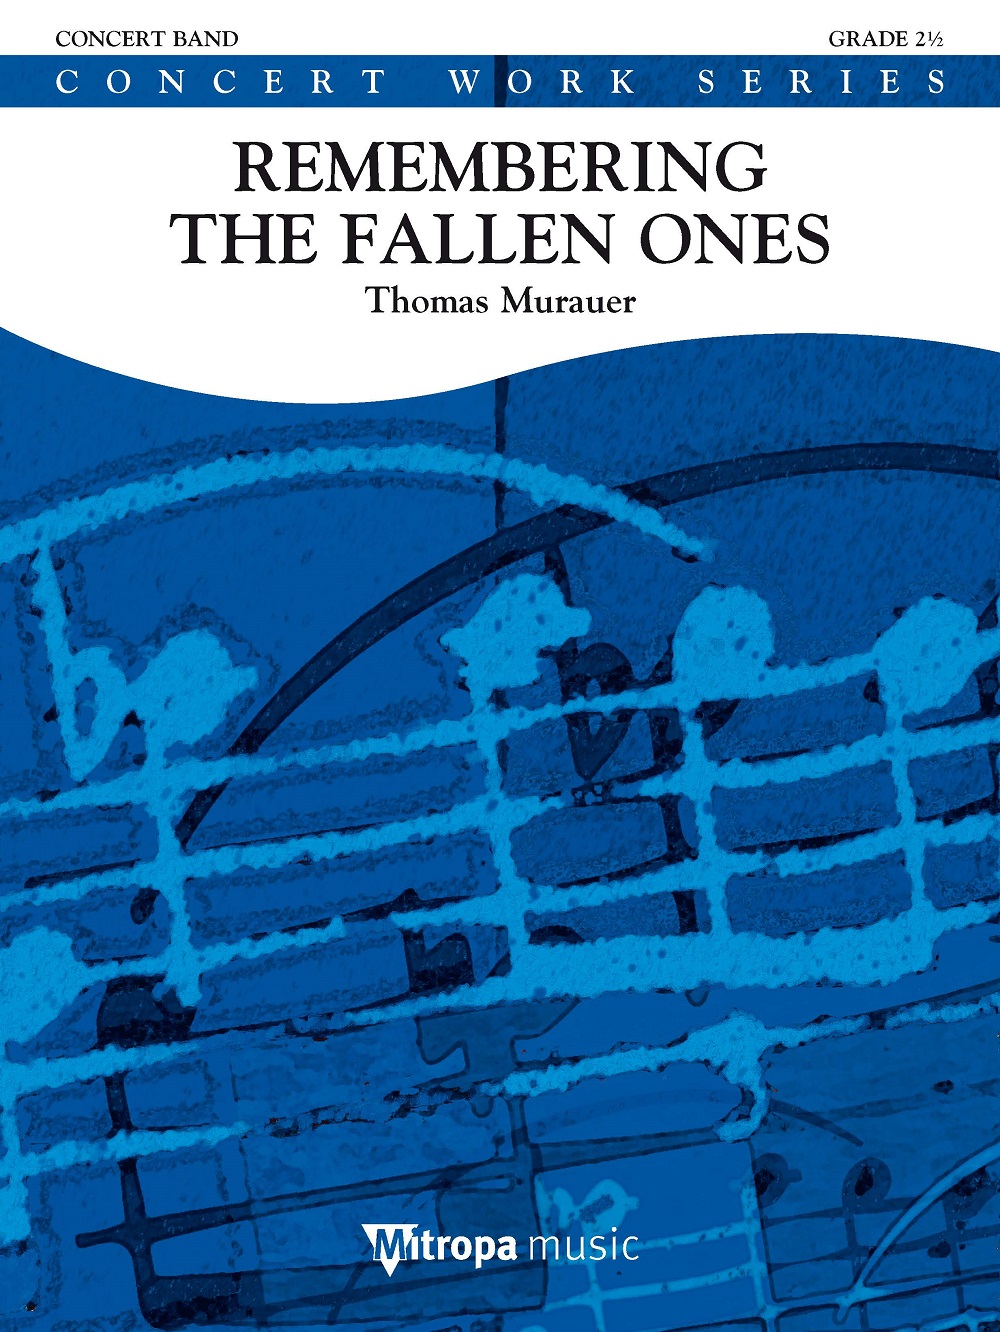 Thomas Murauer: Remembering the Fallen Ones: Concert Band: Score